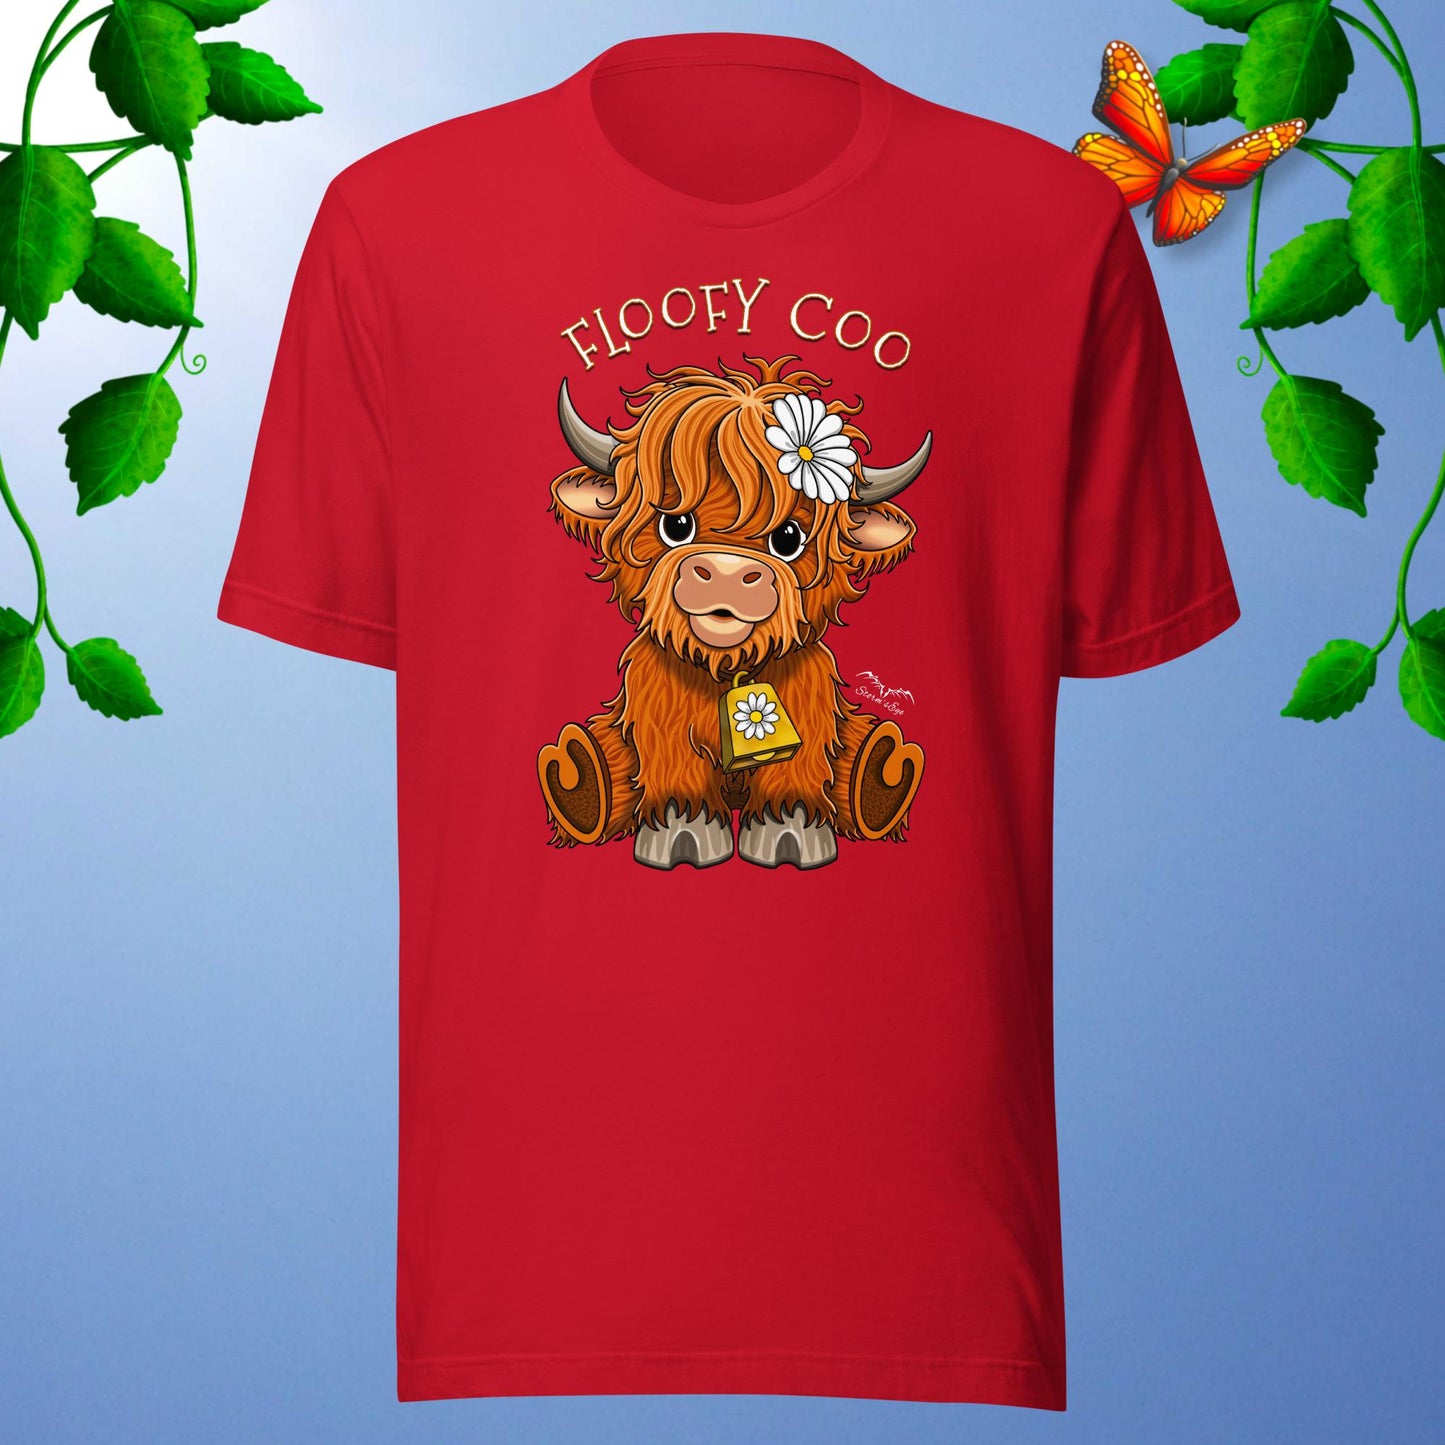 floofy coo highland cow T-shirt, bright red by Stormseye Design